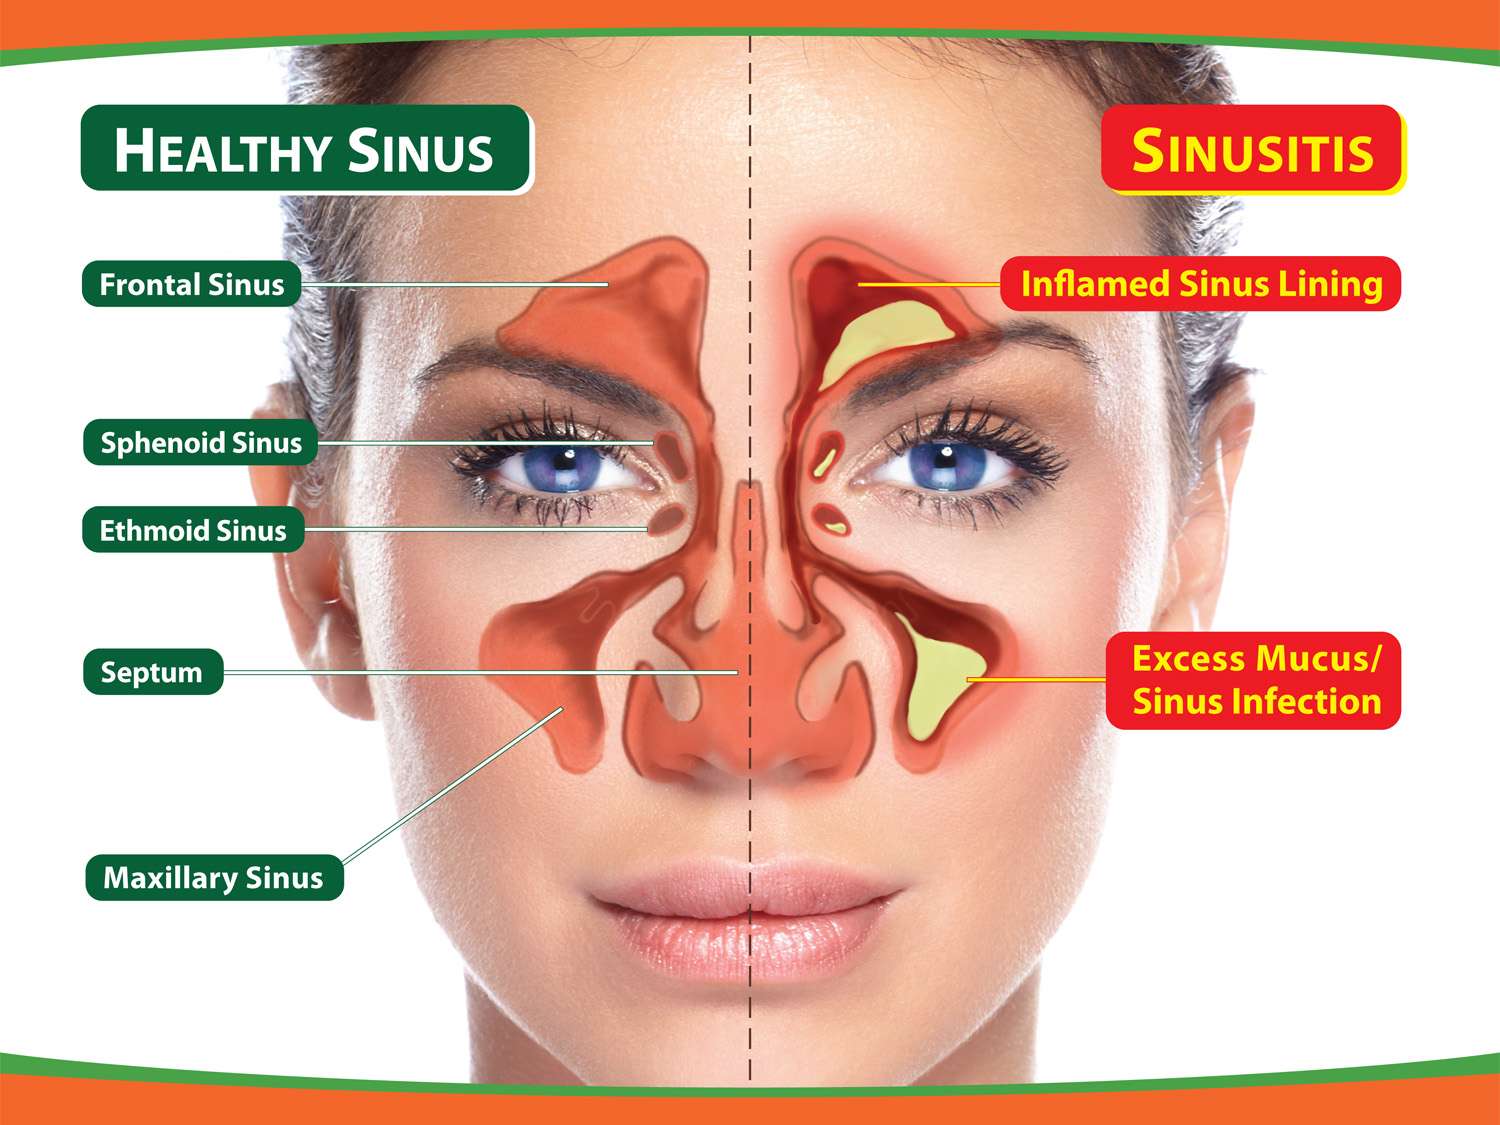 Some Nutrients That Can Help People With Sinus